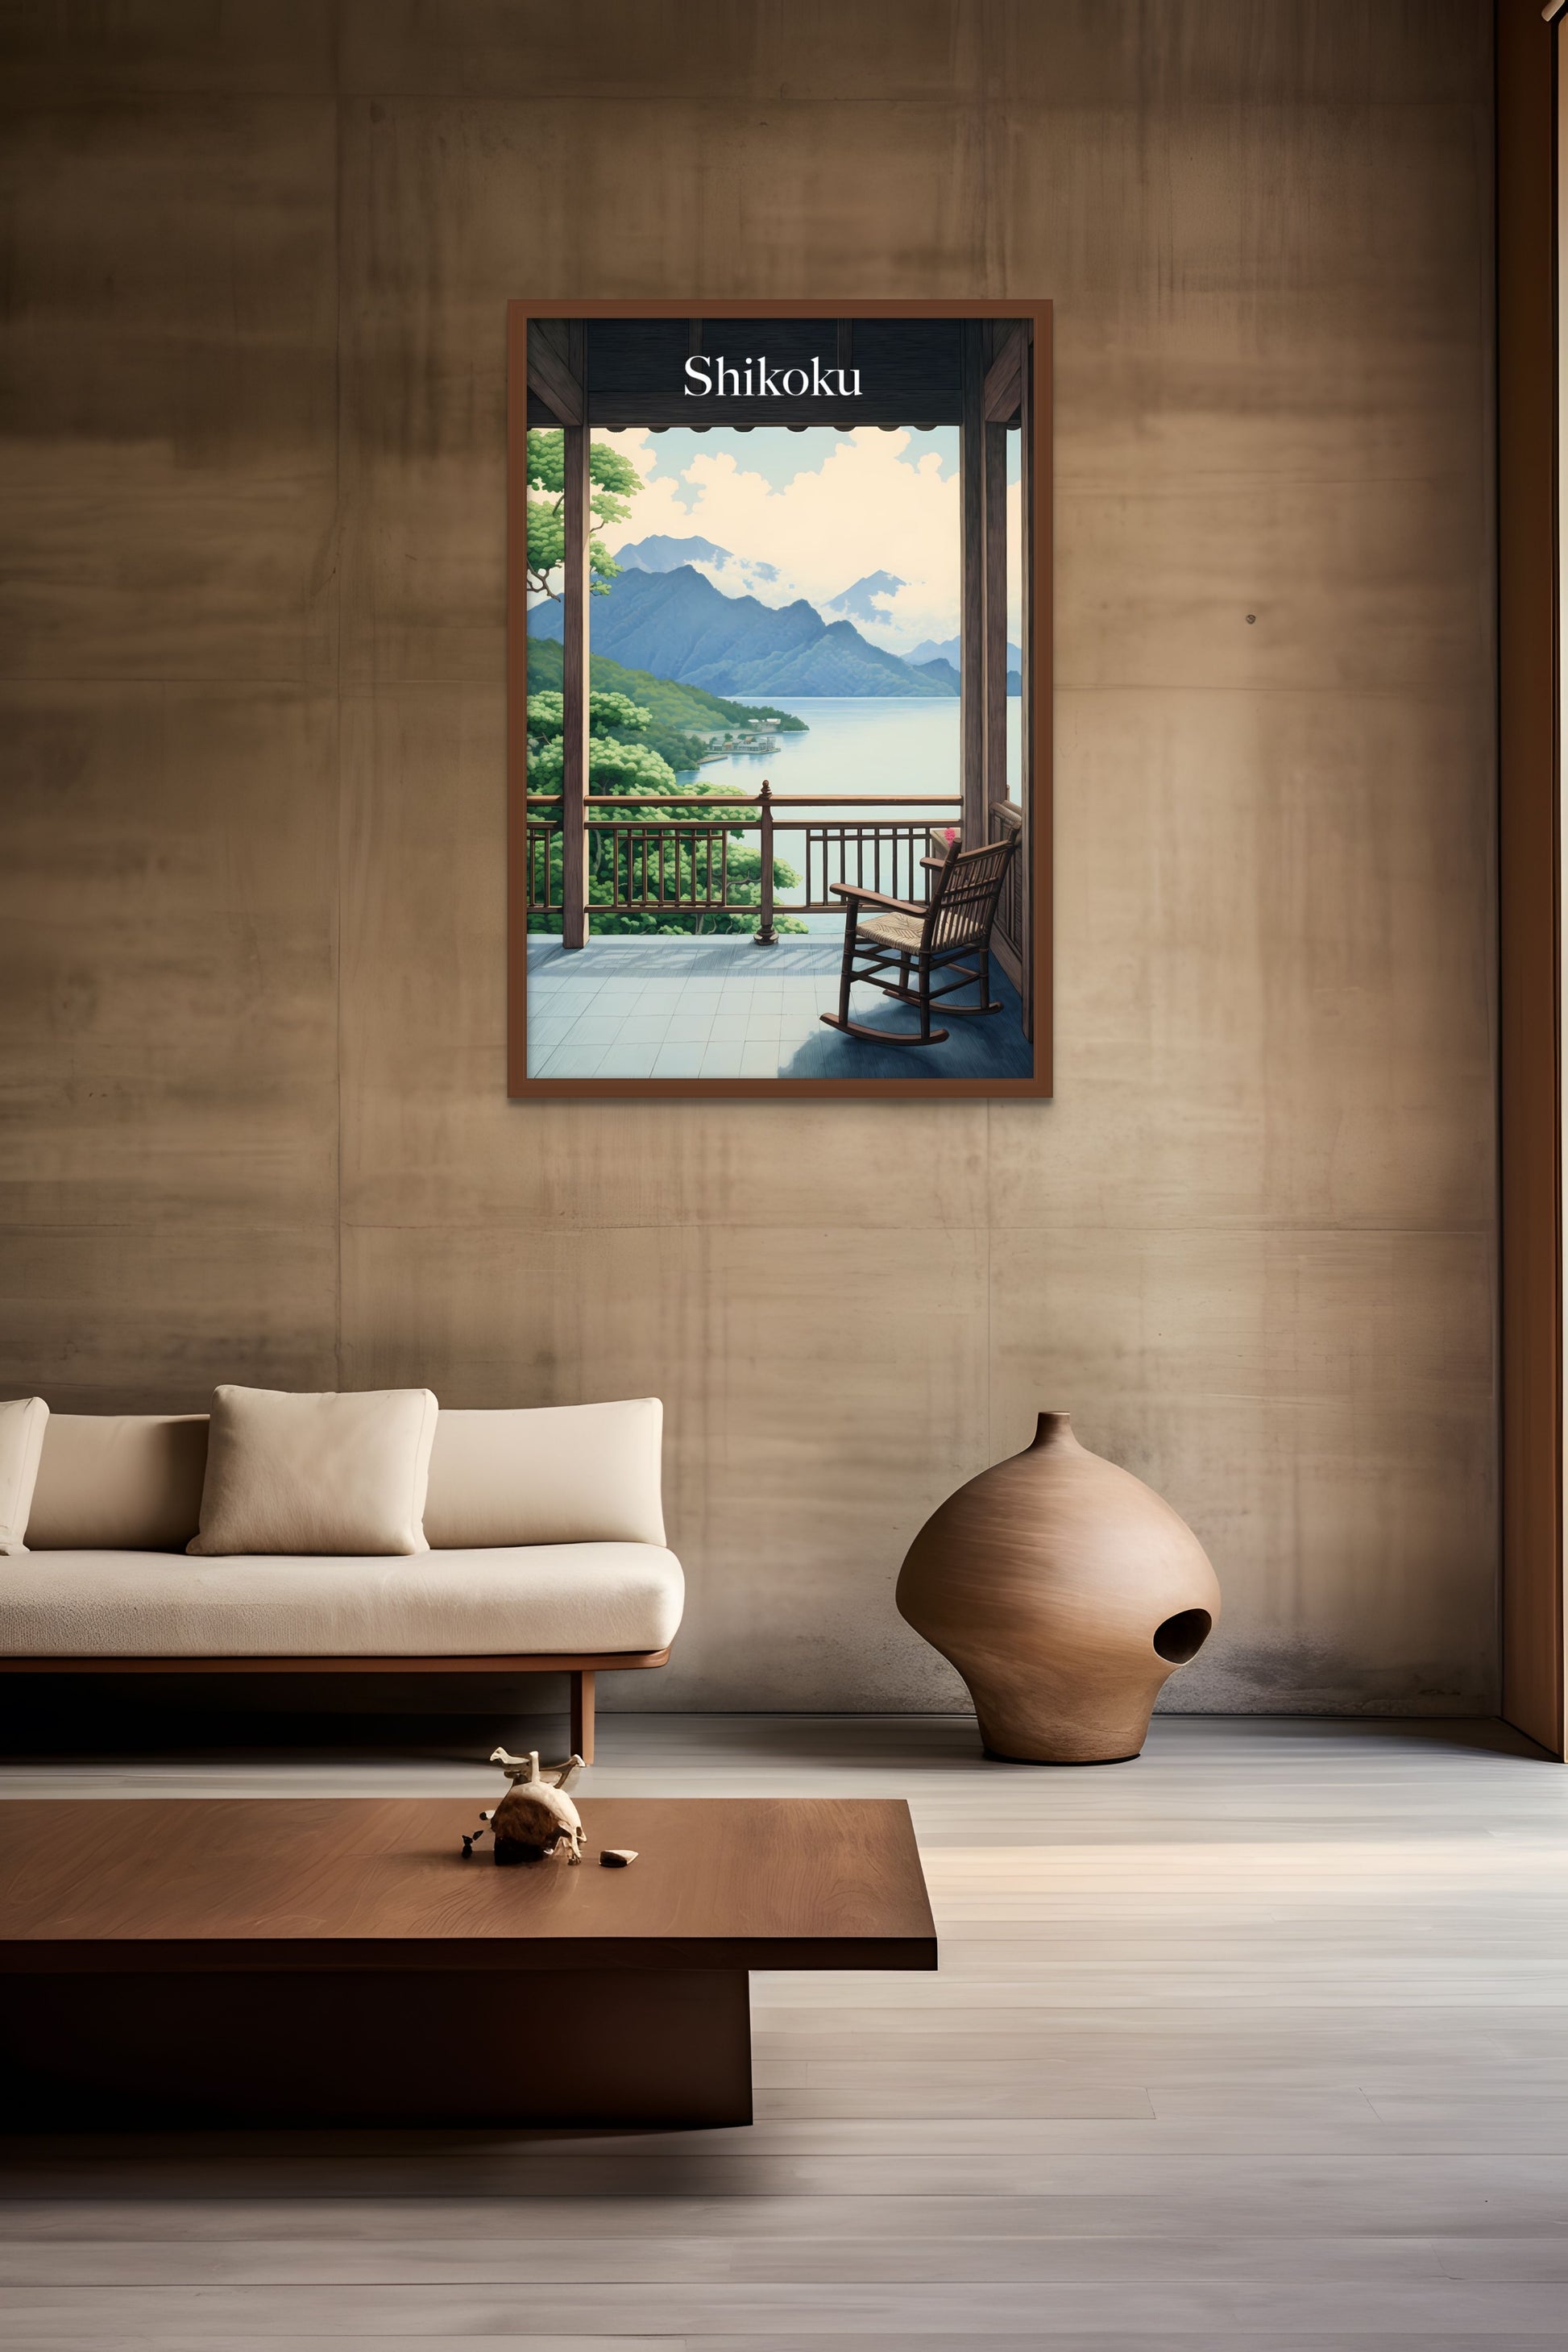 A minimalist living room with a large window looking out to a mountainous landscape, with the text "Shikoku."